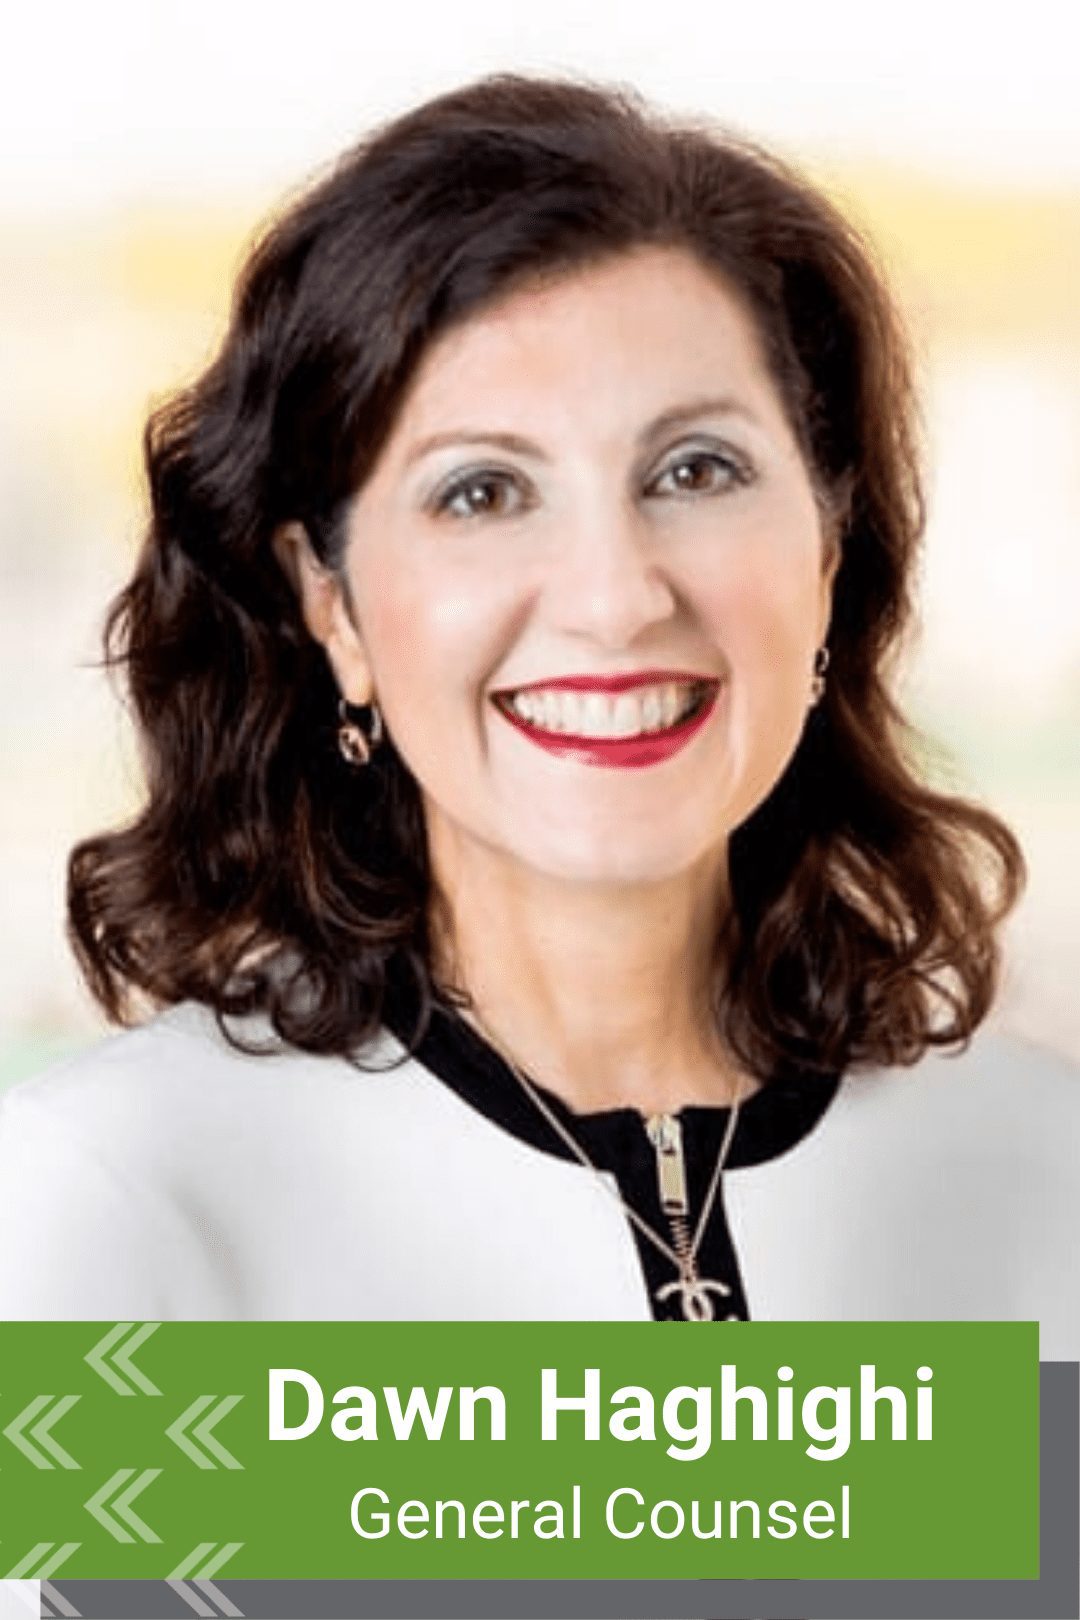 dawn haghighi, general counsel | Our Leaders